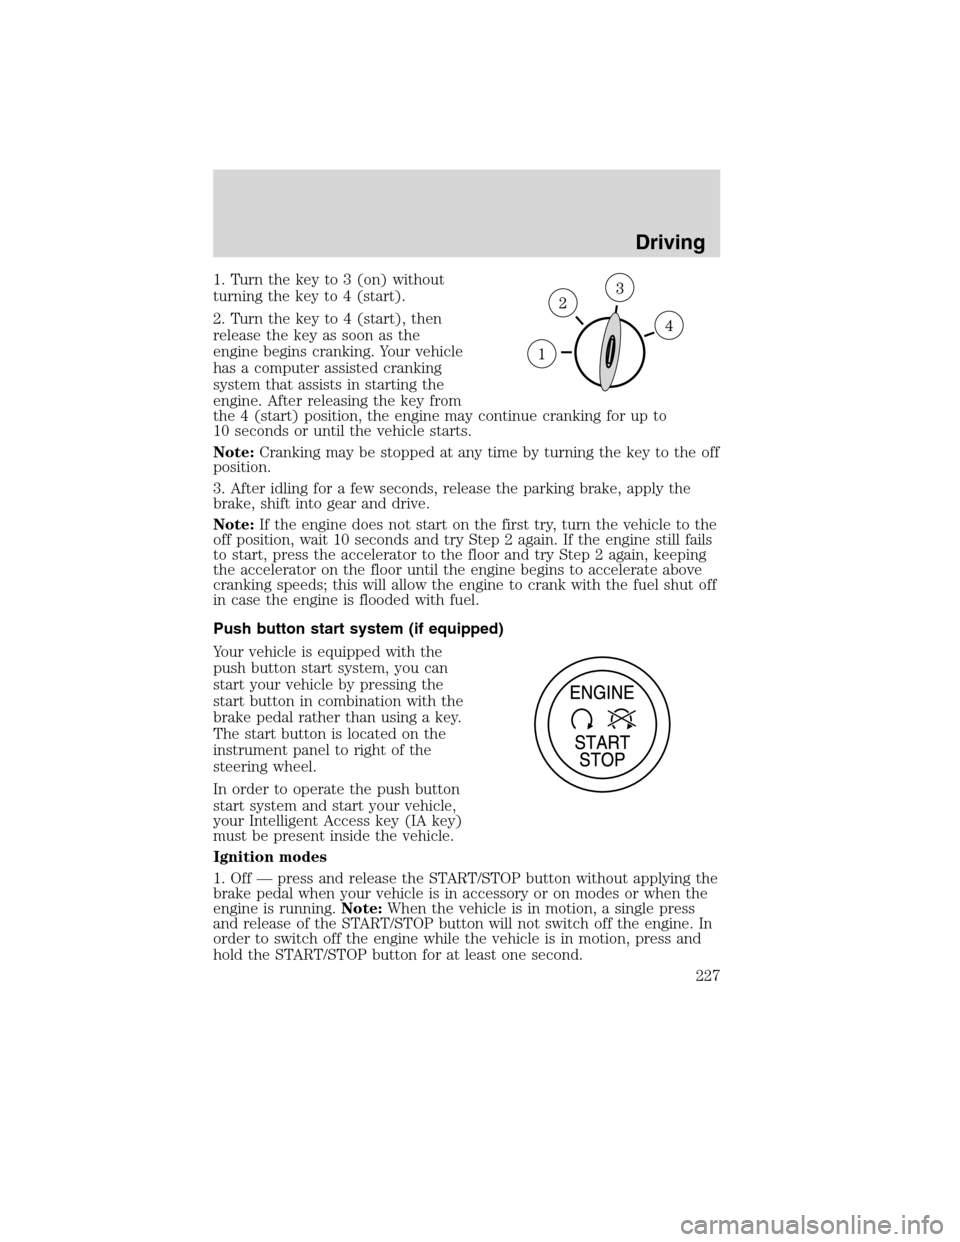 LINCOLN MKS 2010 Service Manual 1. Turn the key to 3 (on) without
turning the key to 4 (start).
2. Turn the key to 4 (start), then
release the key as soon as the
engine begins cranking. Your vehicle
has a computer assisted cranking
